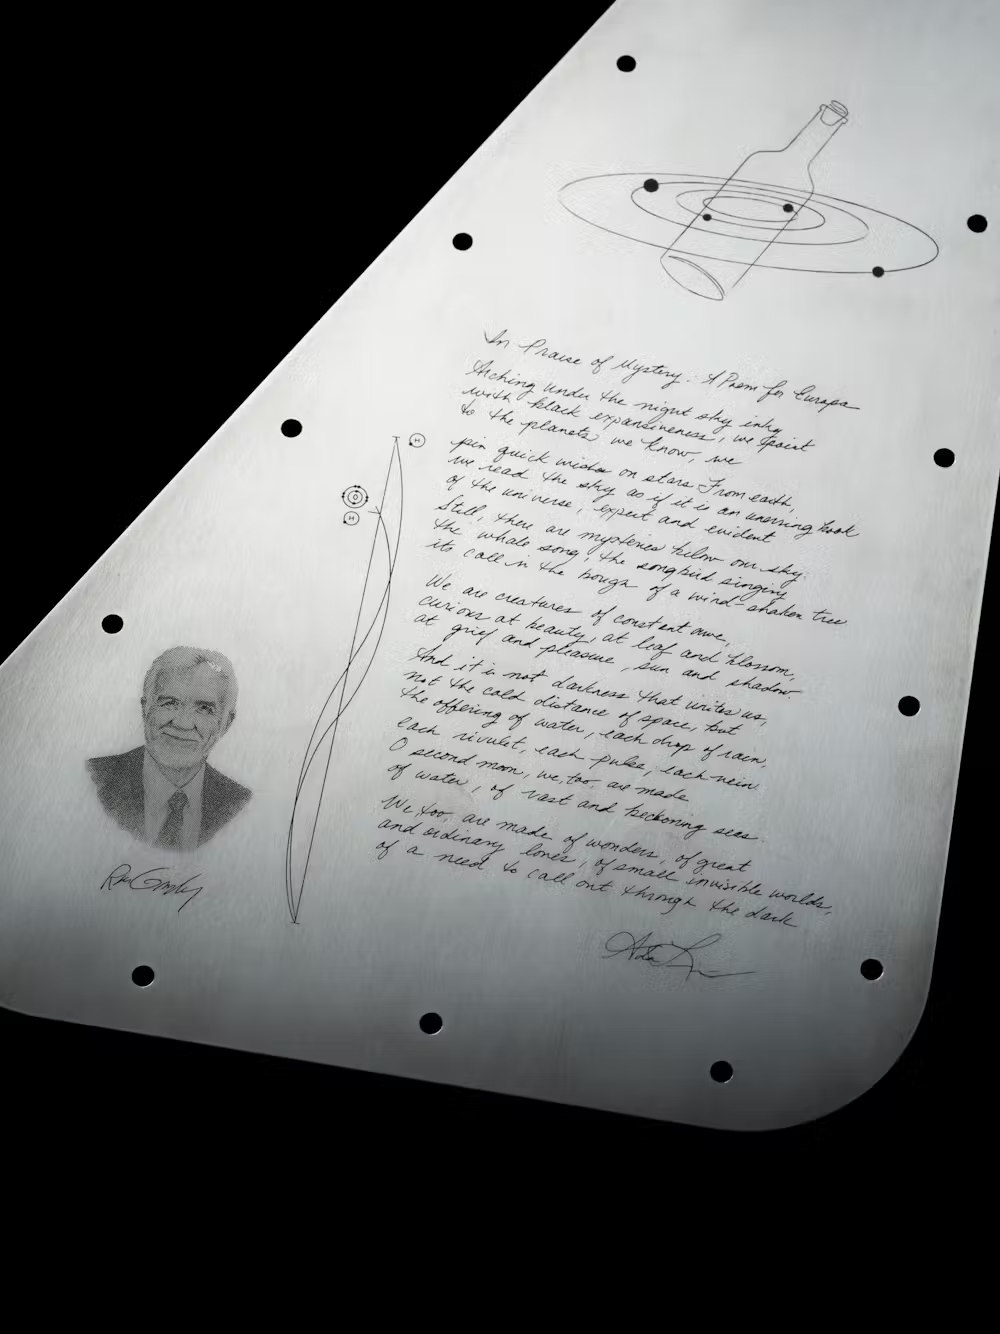 a triangular metal plate with curved corners and an etching of an a handwritten letter and someone's face on the surface.